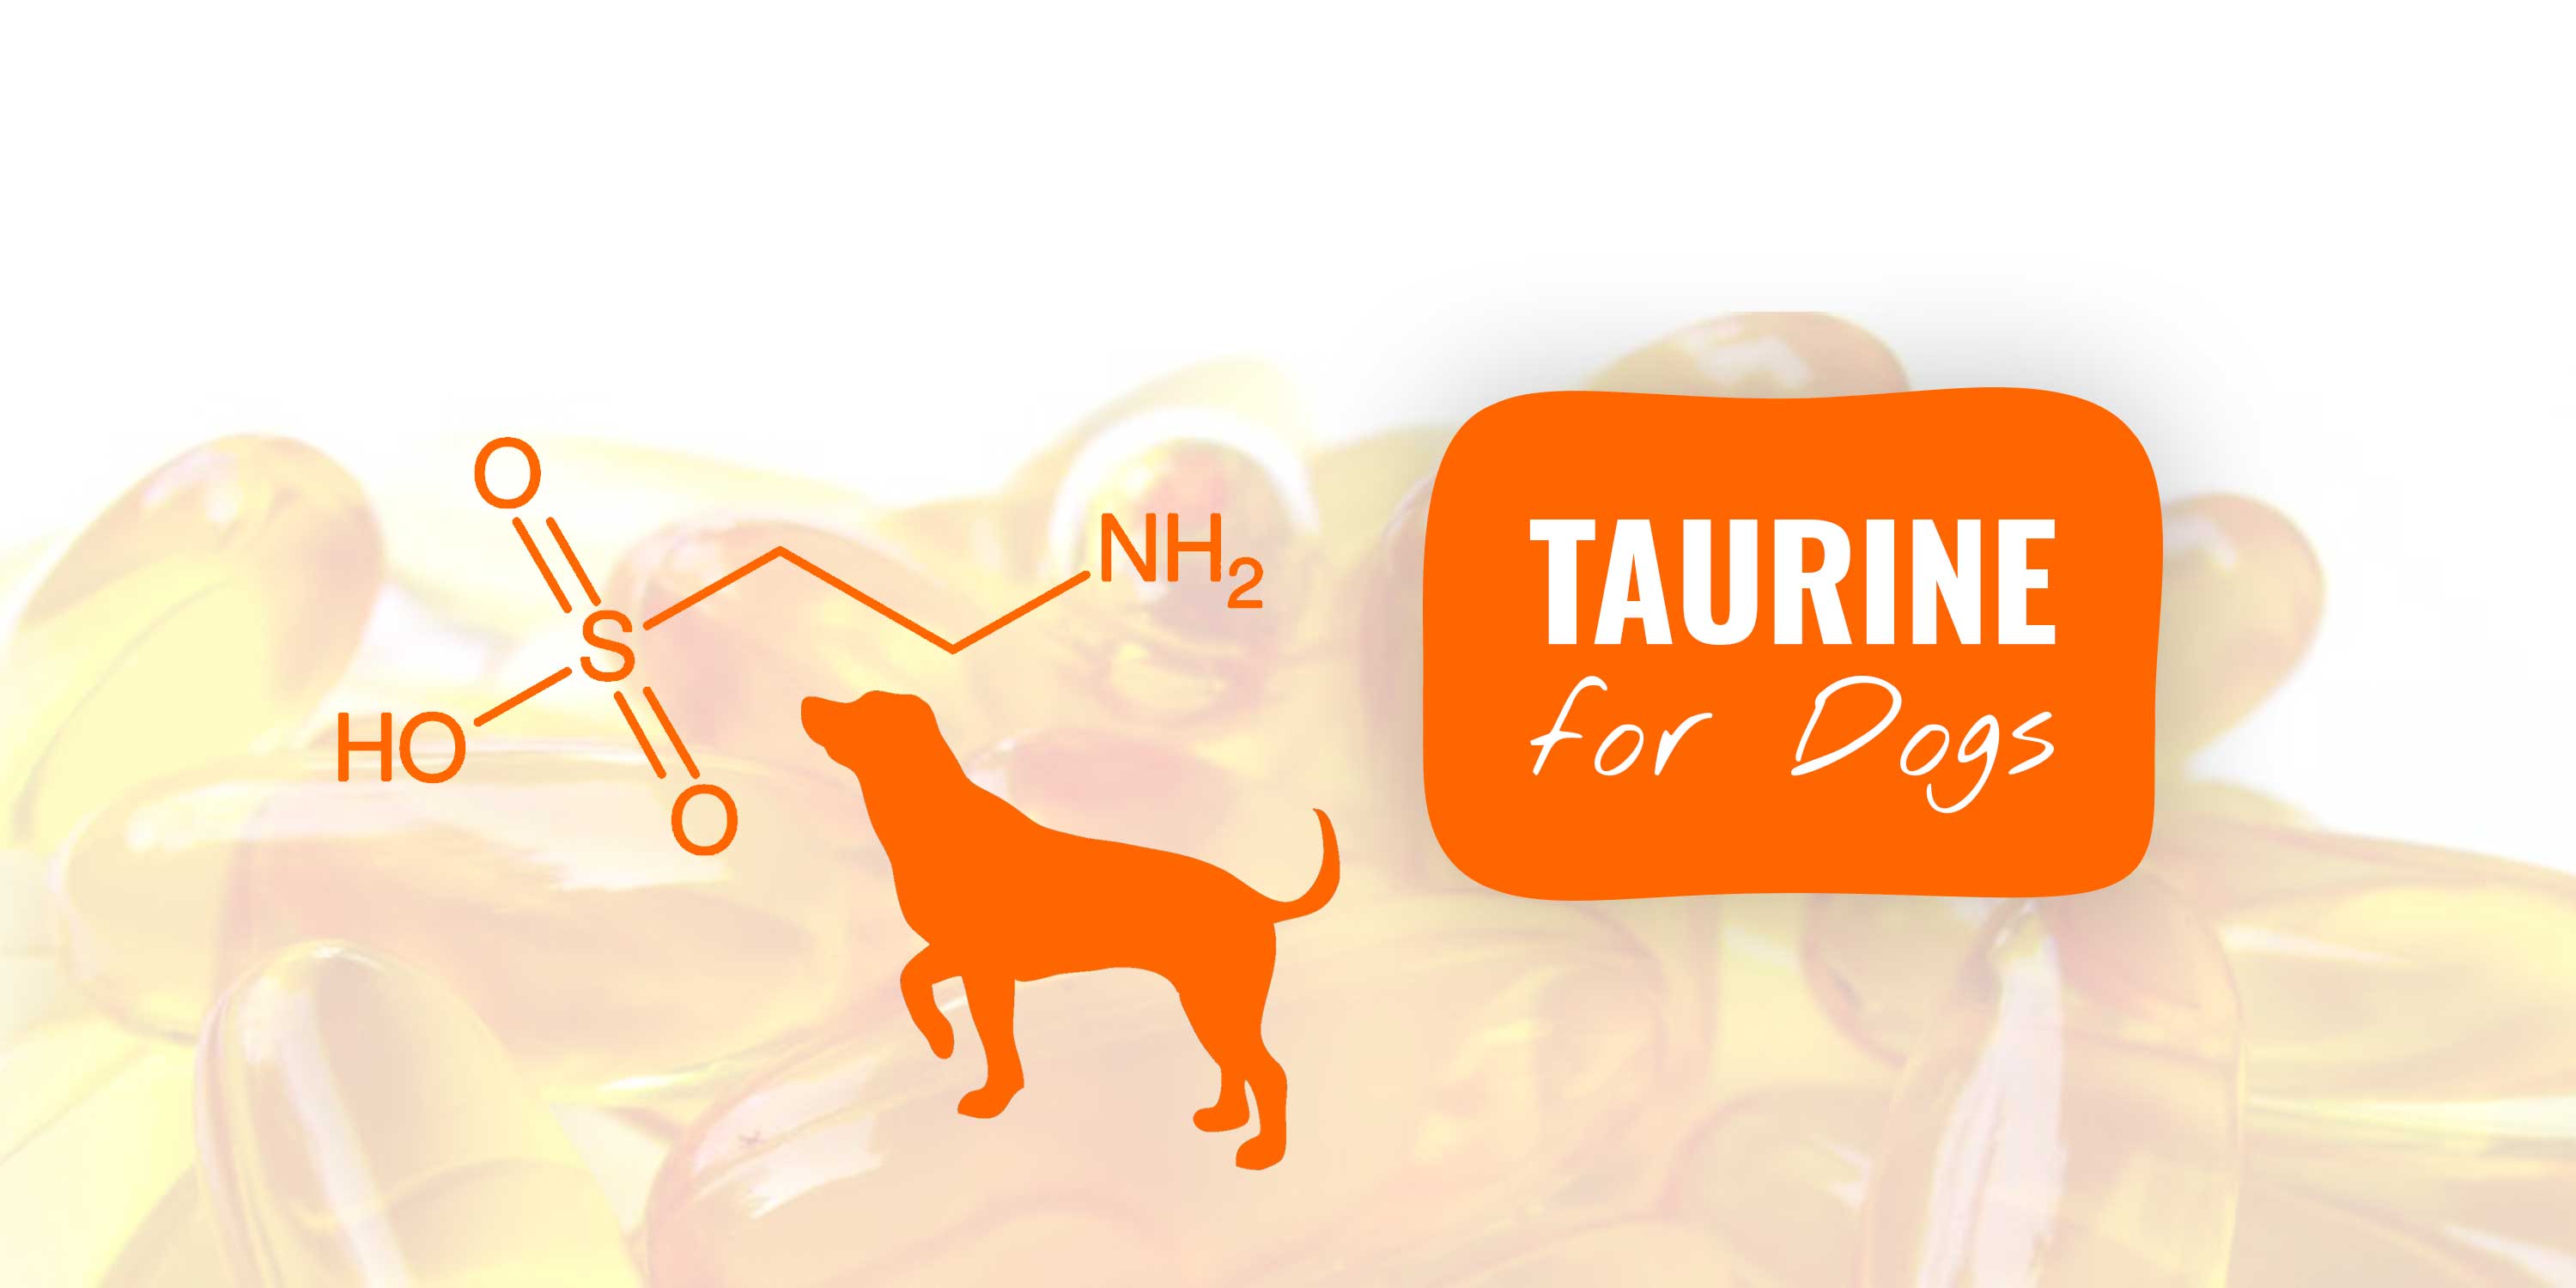 other names for taurine in dog food